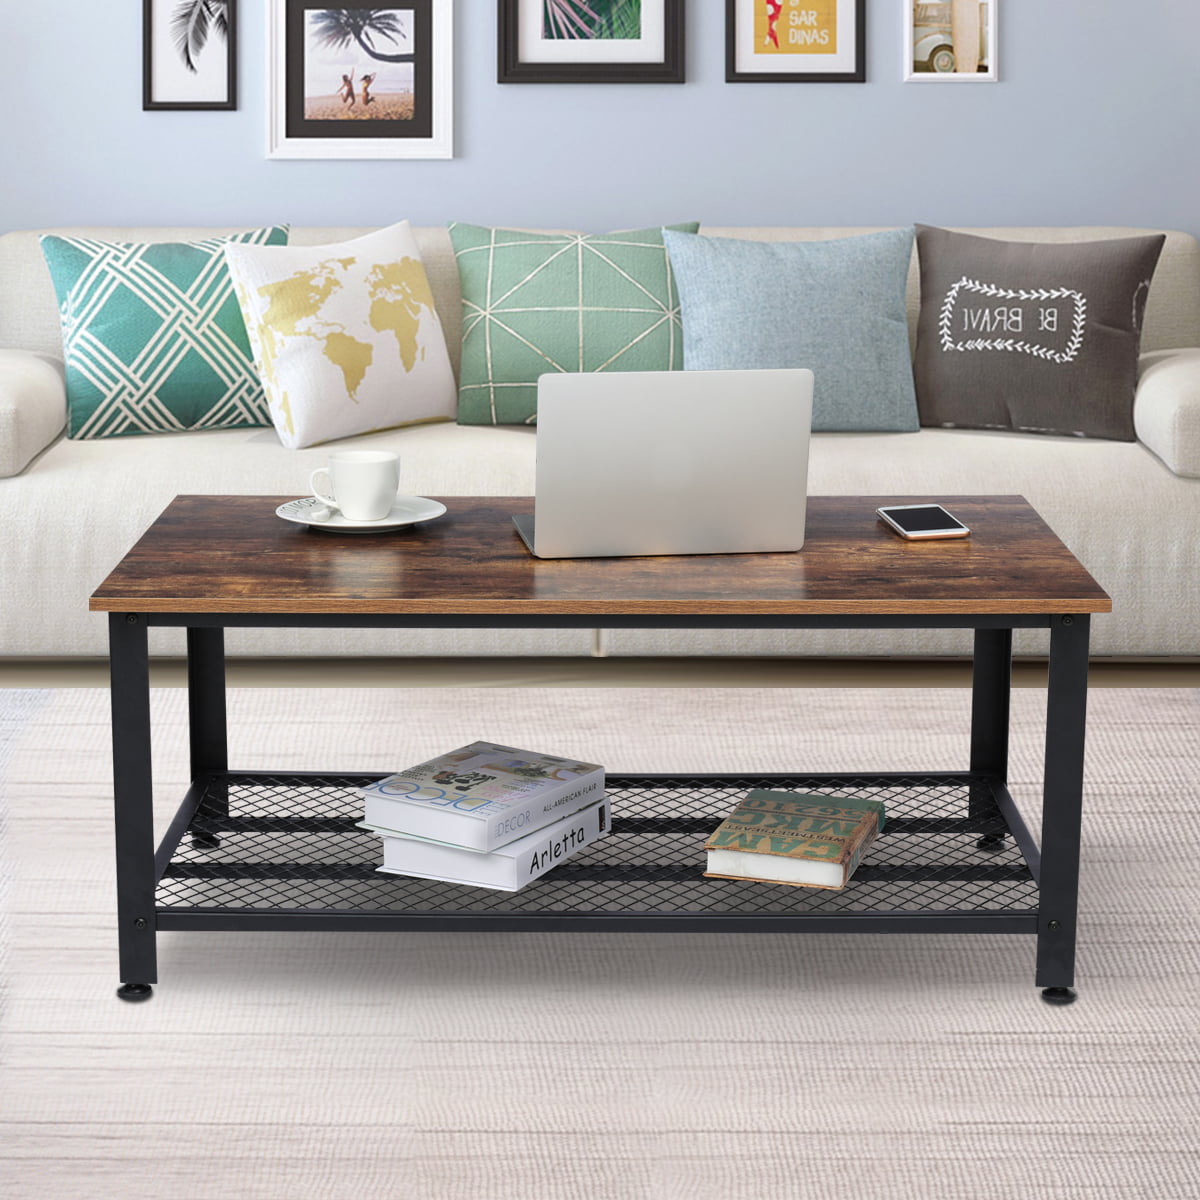 Industrial Coffee Table With Storage, Living Room Coffee And End Tables